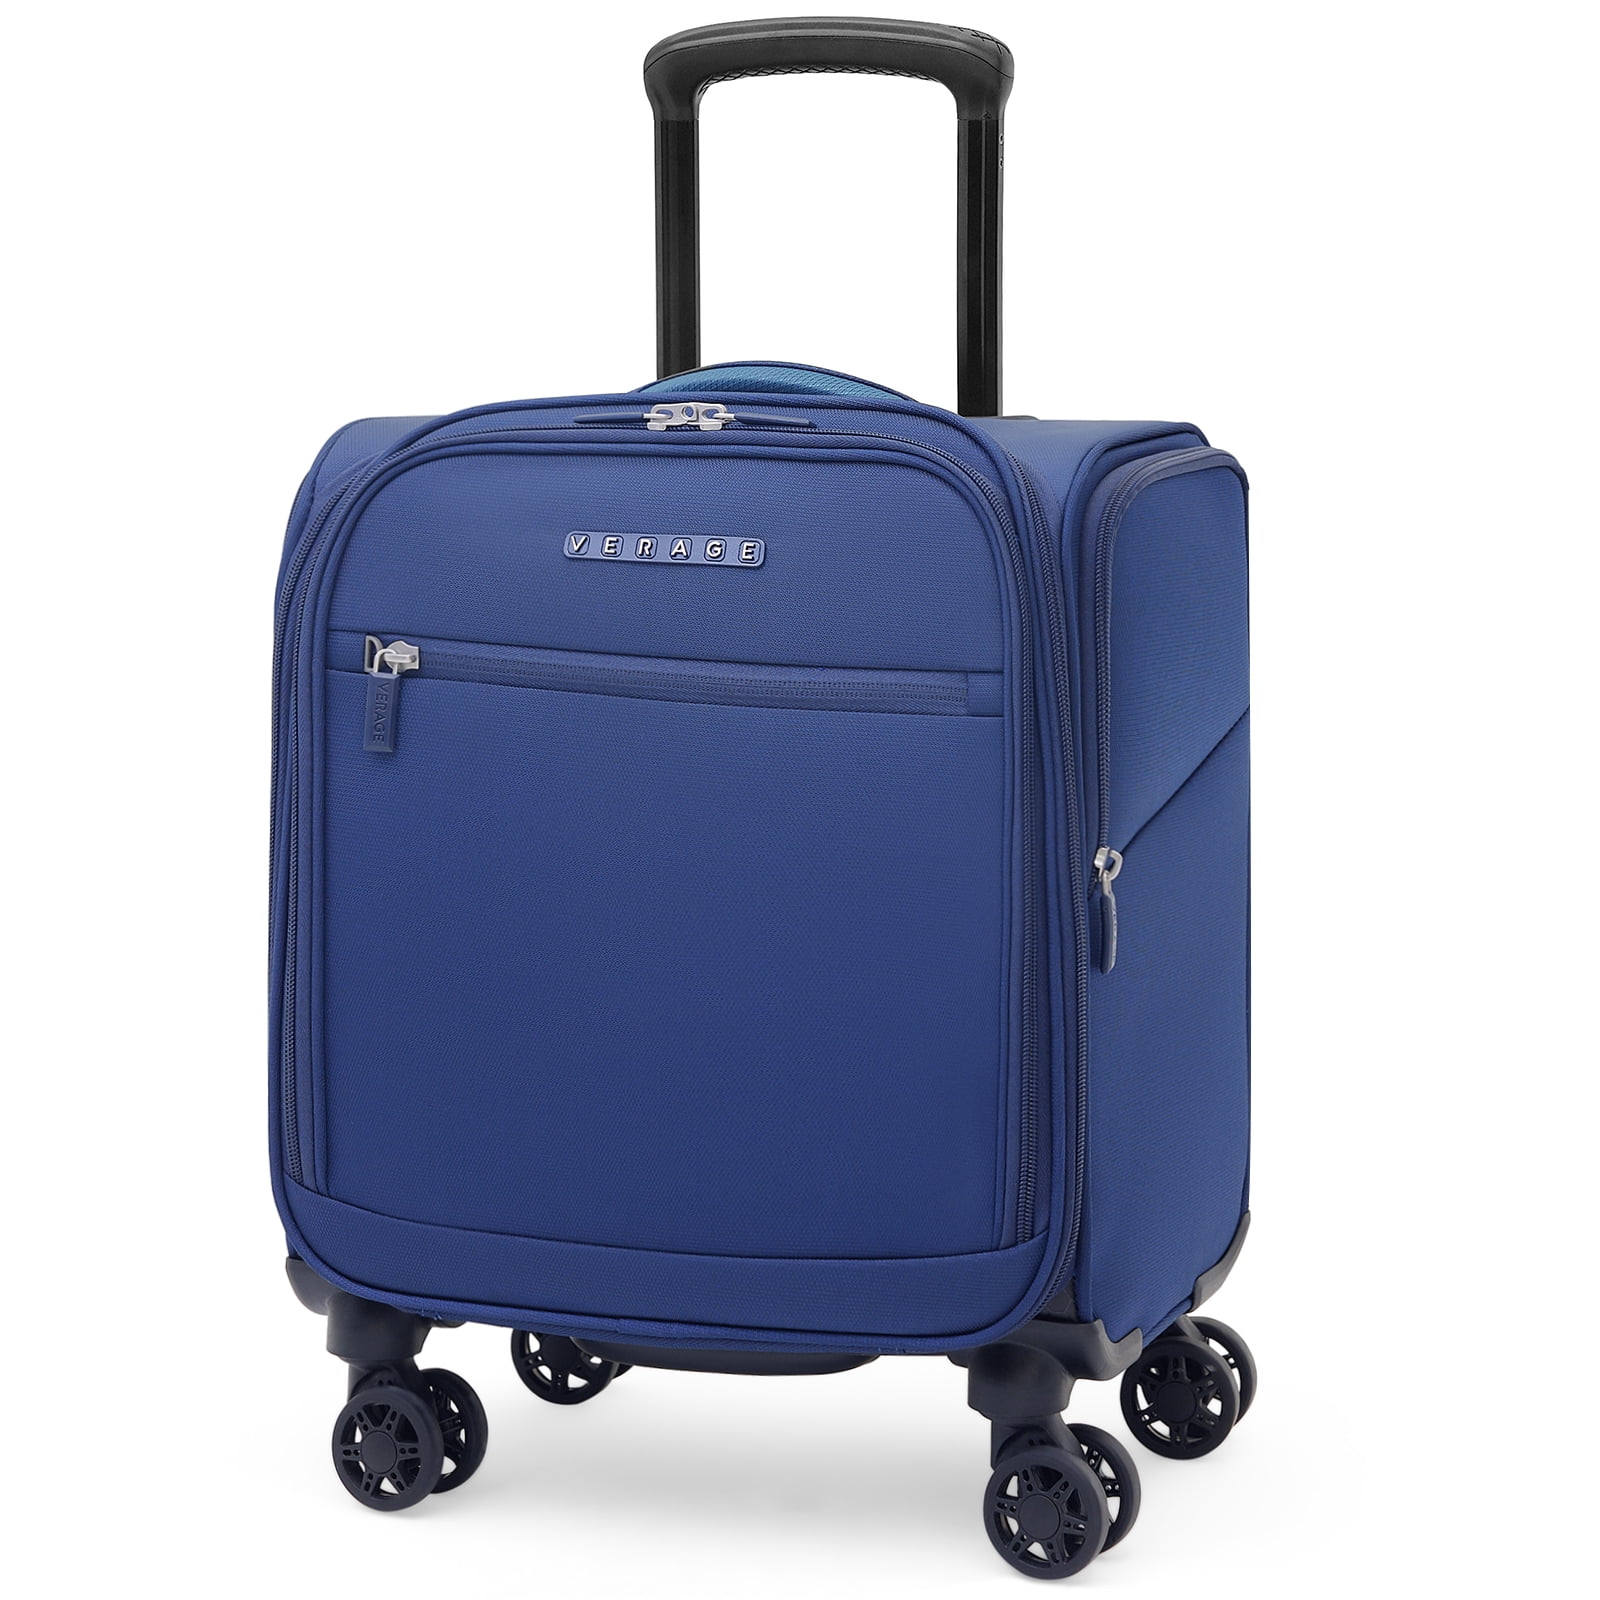 Verage Luggage Trolley - Verage Luggage Cart Price Starting From Rs  650/Unit. Find Verified Sellers in Rajkot - JdMart